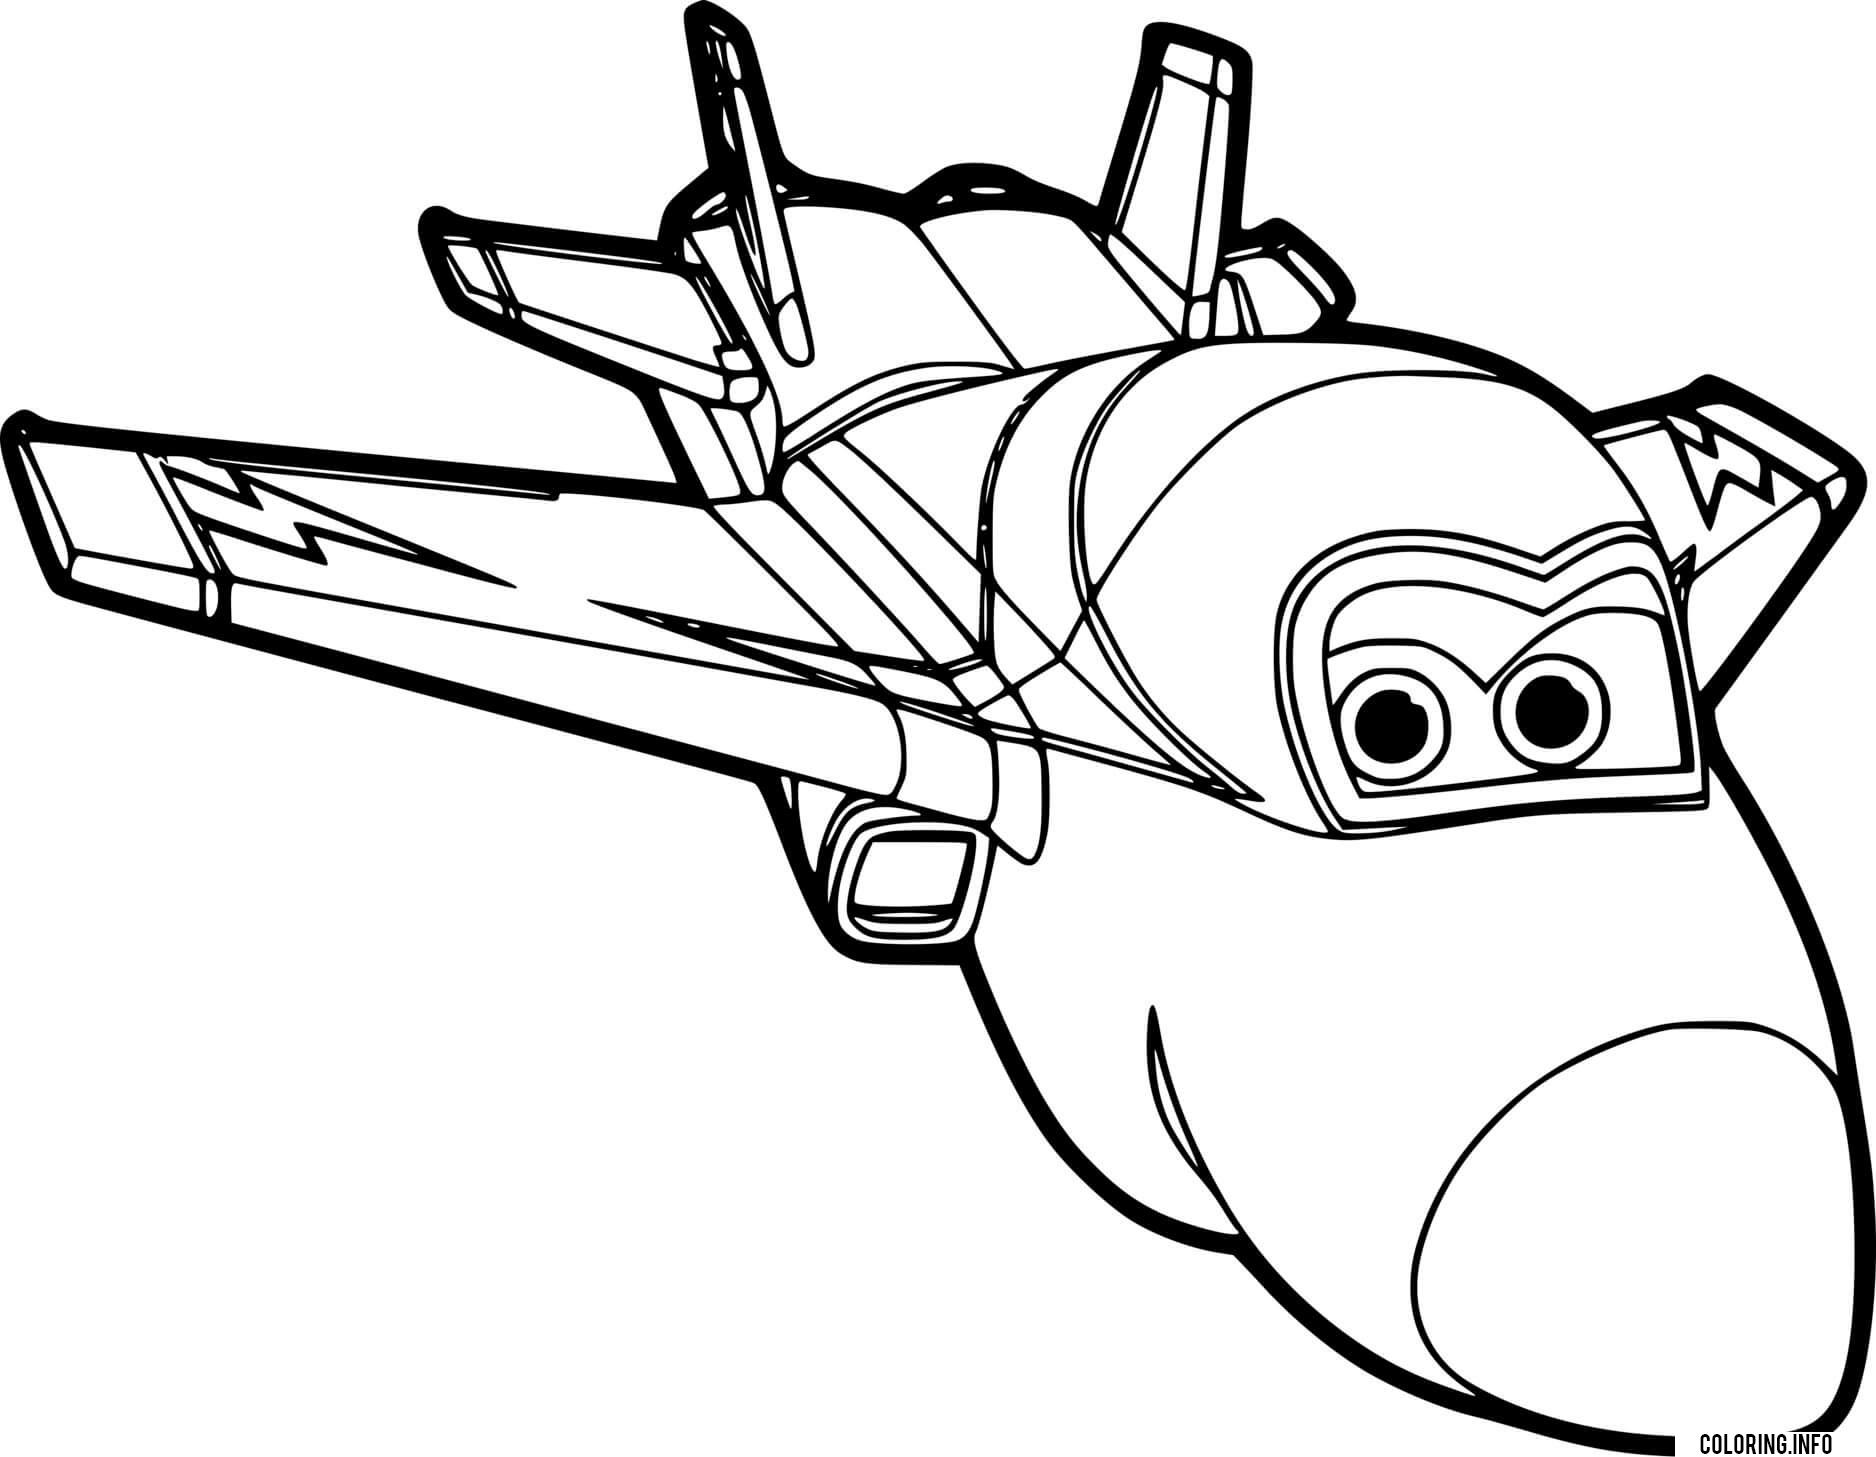 Airplane Jerome From Super Wings coloring